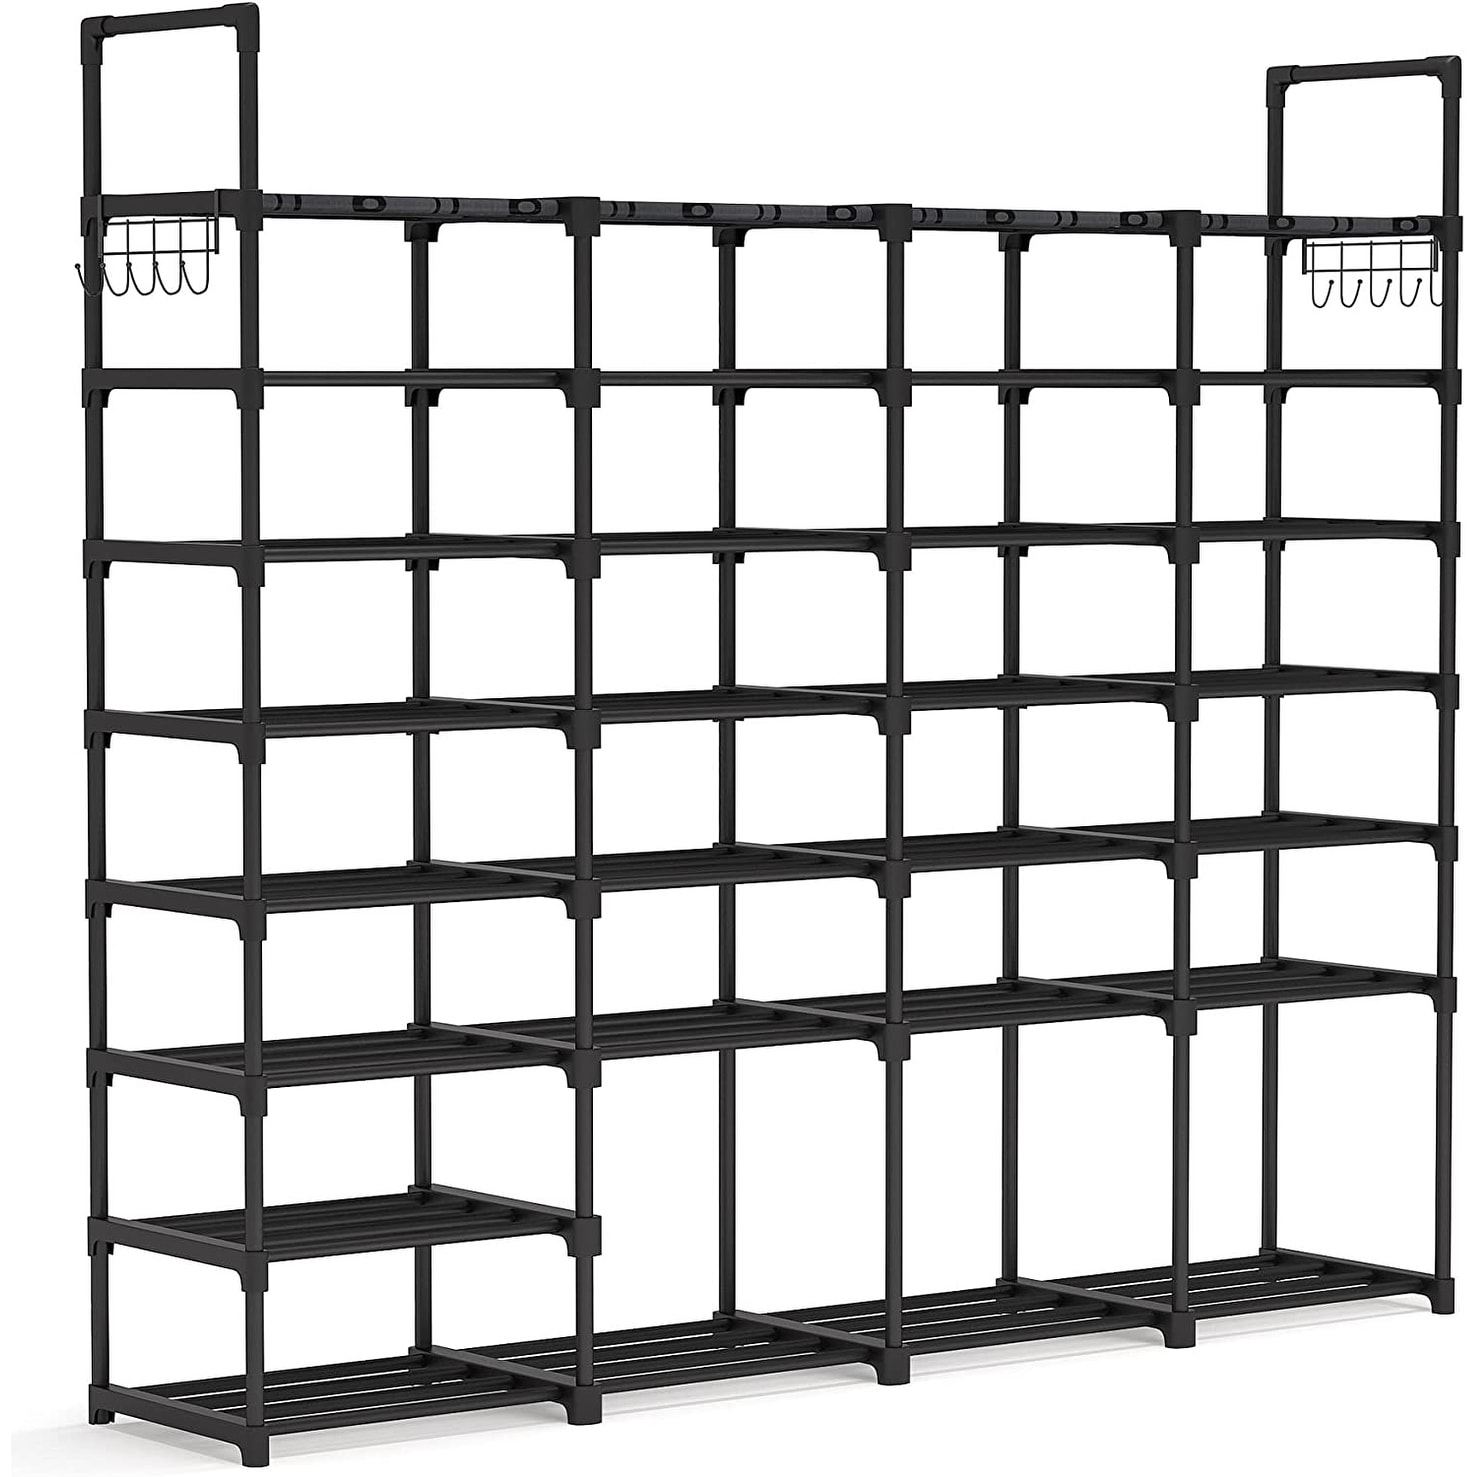 LANGRIA 4-Tier Tilted Metal Utility Shoe Rack With Wire Mesh Shelves-  Copper Finish - Bed Bath & Beyond - 22813932